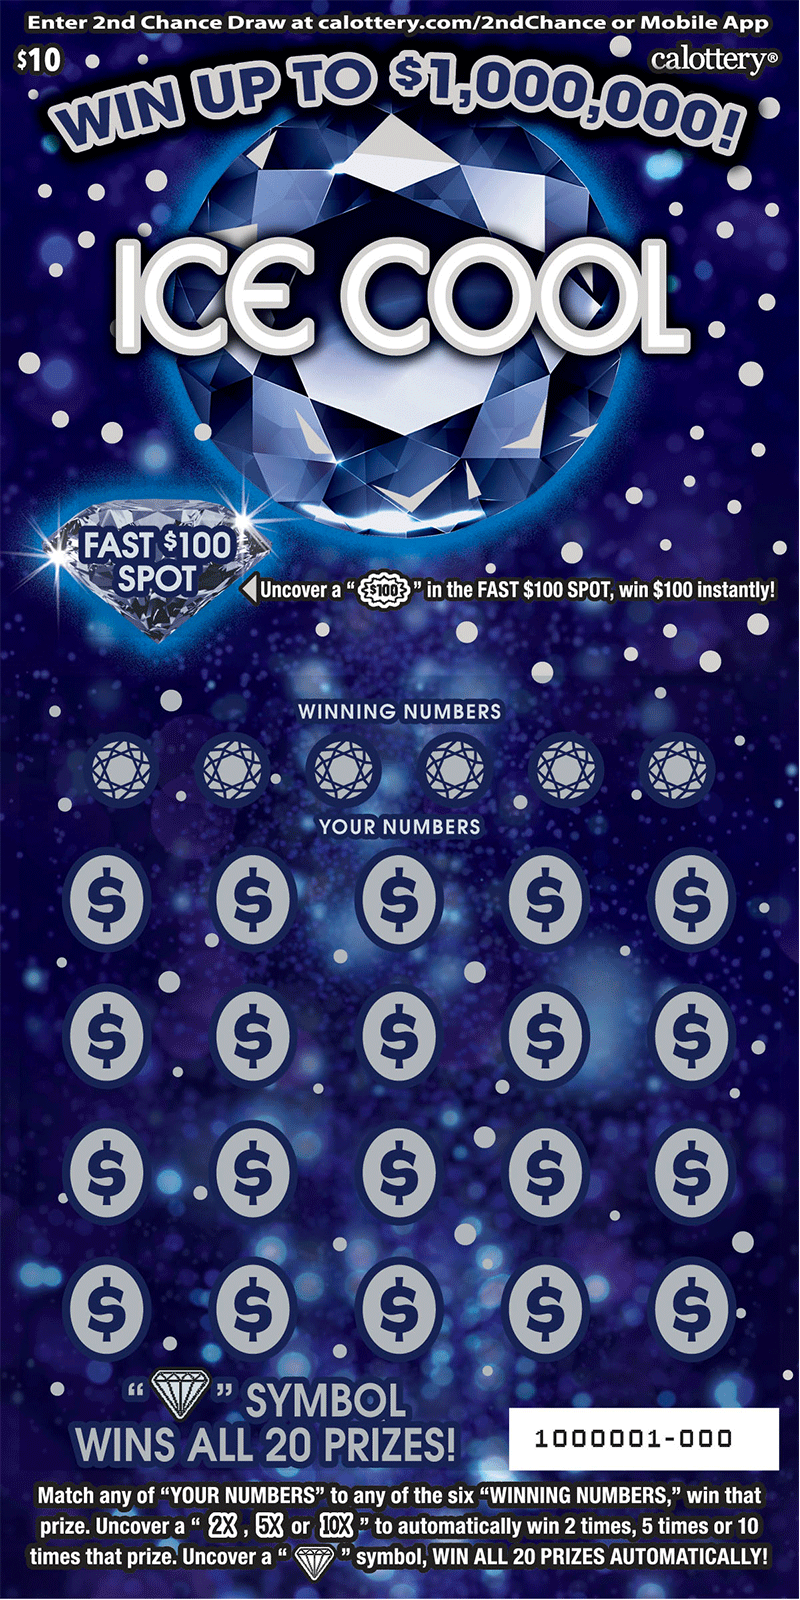 https://static.www.calottery.com/-/media/Project/calottery/PWS/Scratchers/1584-10-Ice-Cool-CV.png?rev=5bbd9773c6d24b6d961cb7acca595bad&h=1600&w=800&la=en&hash=02AB573F183DA750C284BA8E194C8249